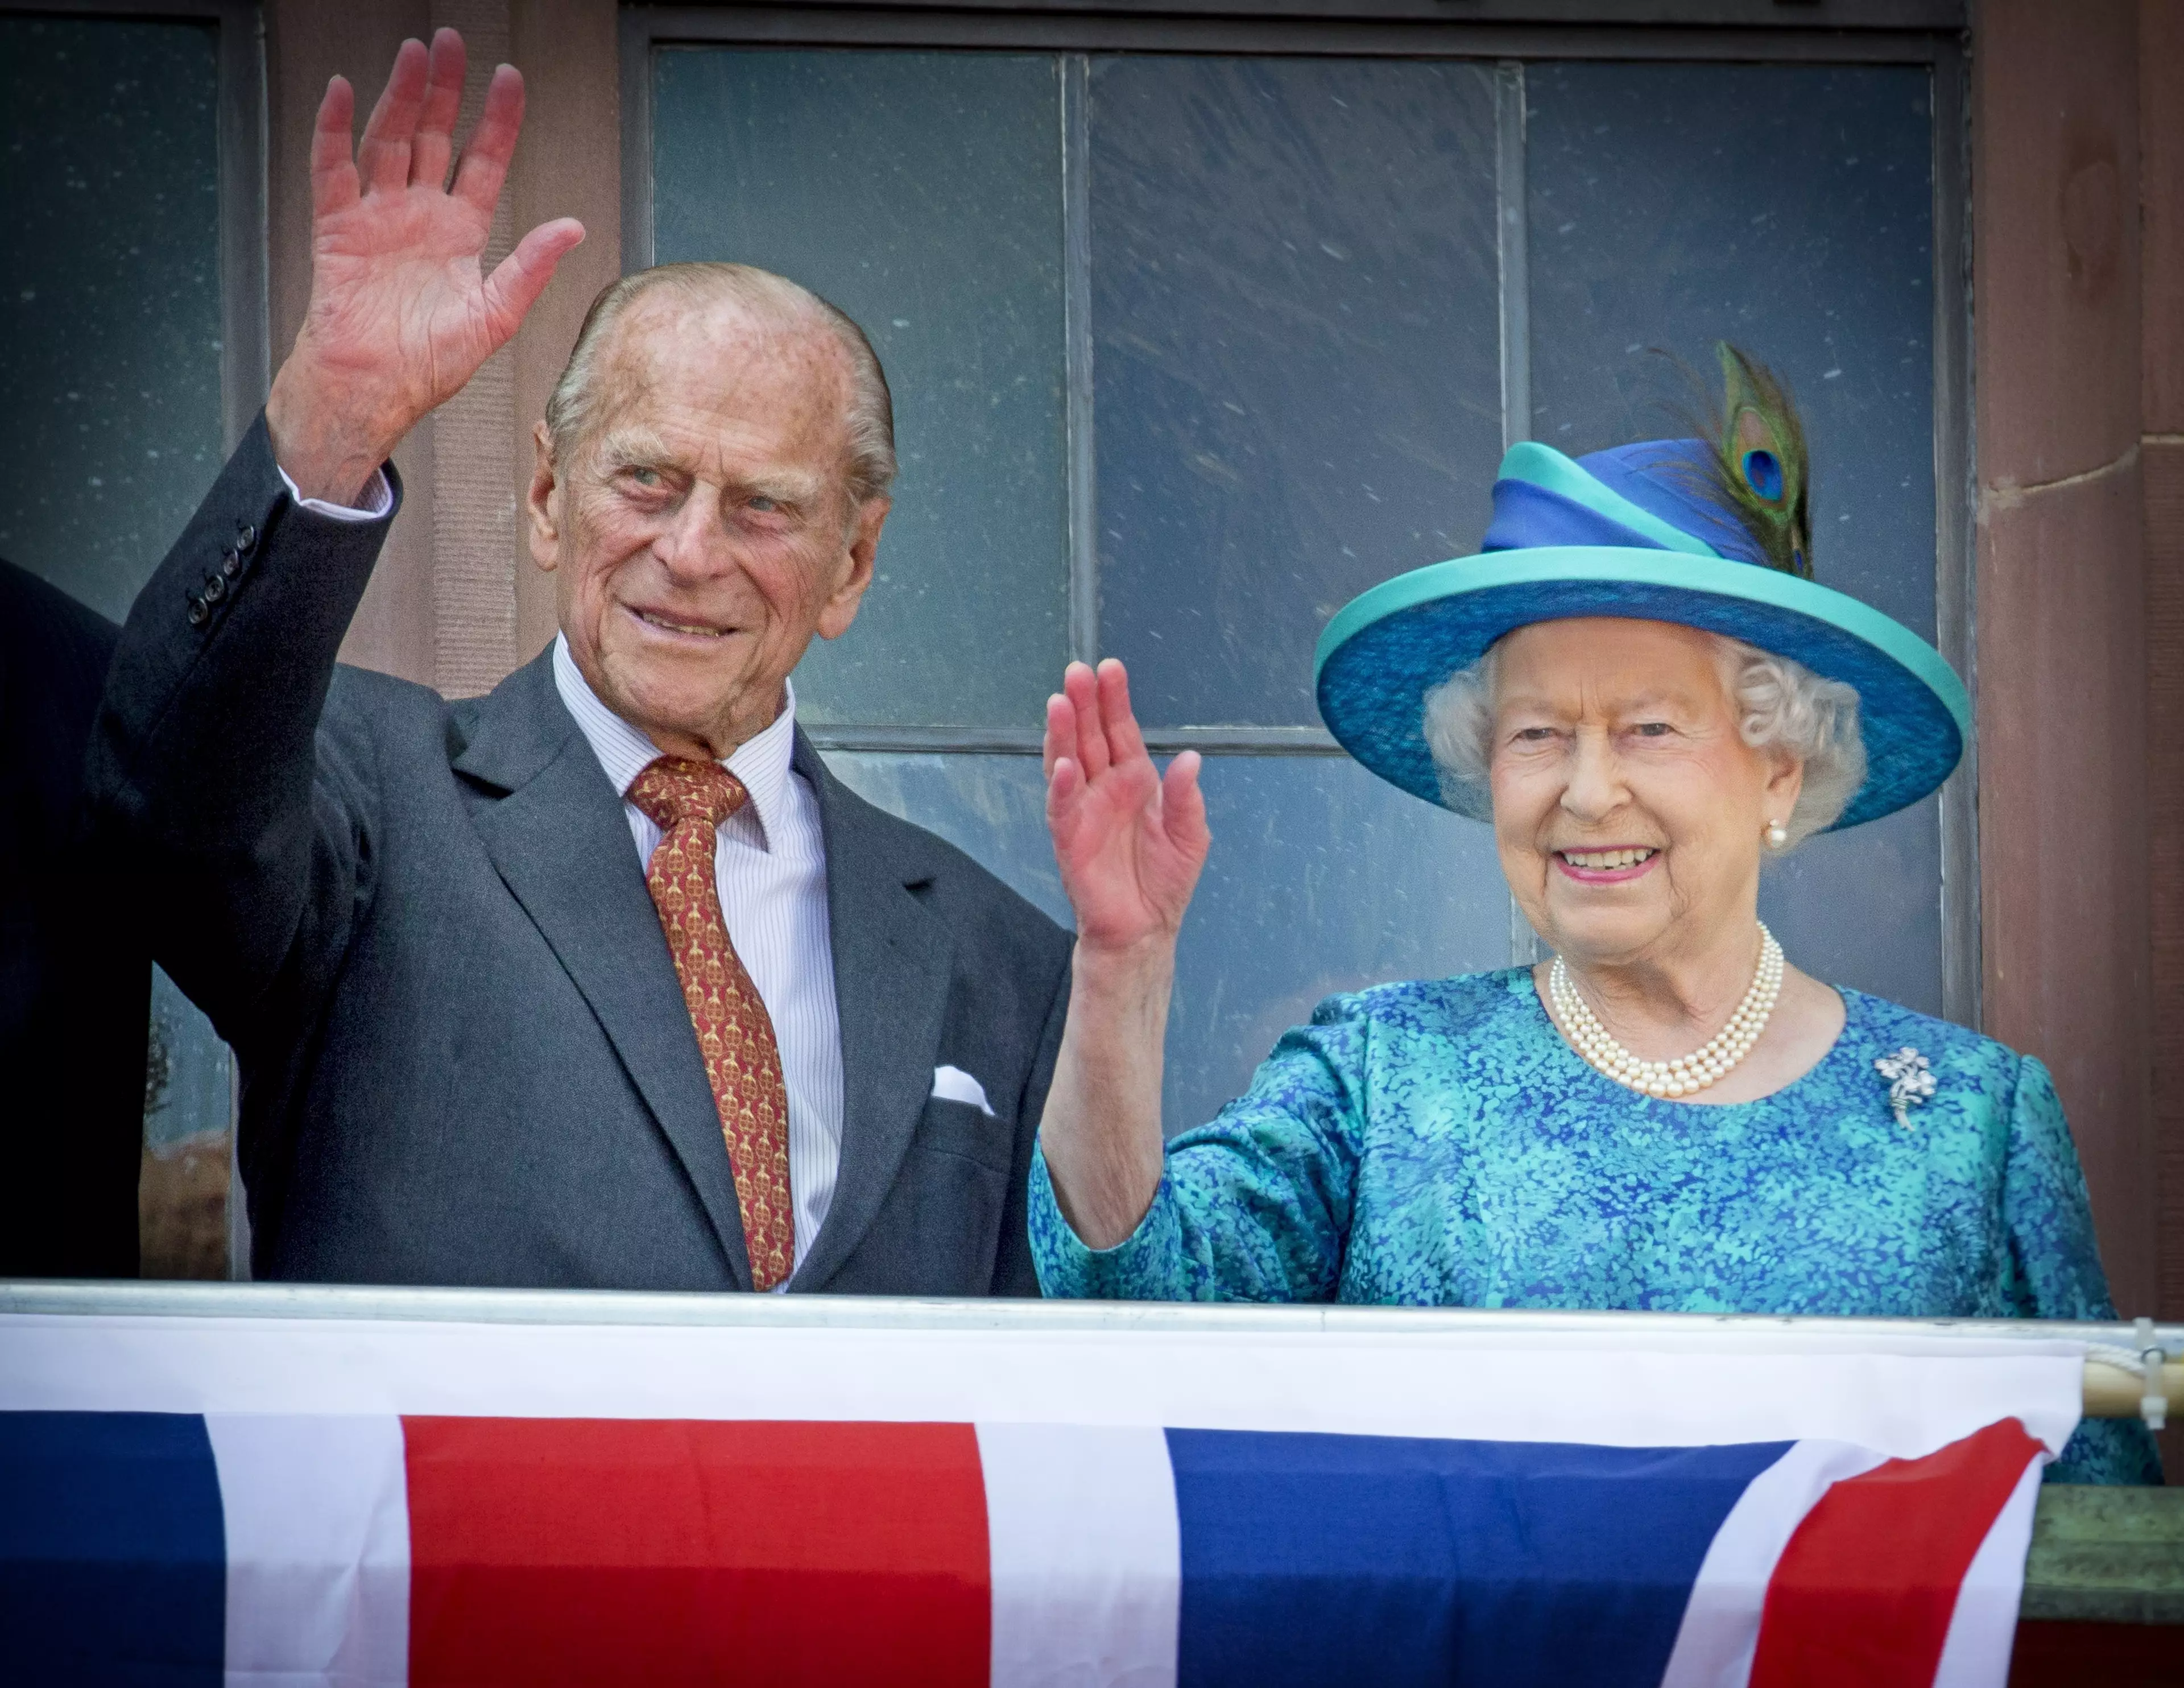 Prince Philip and The Queen.